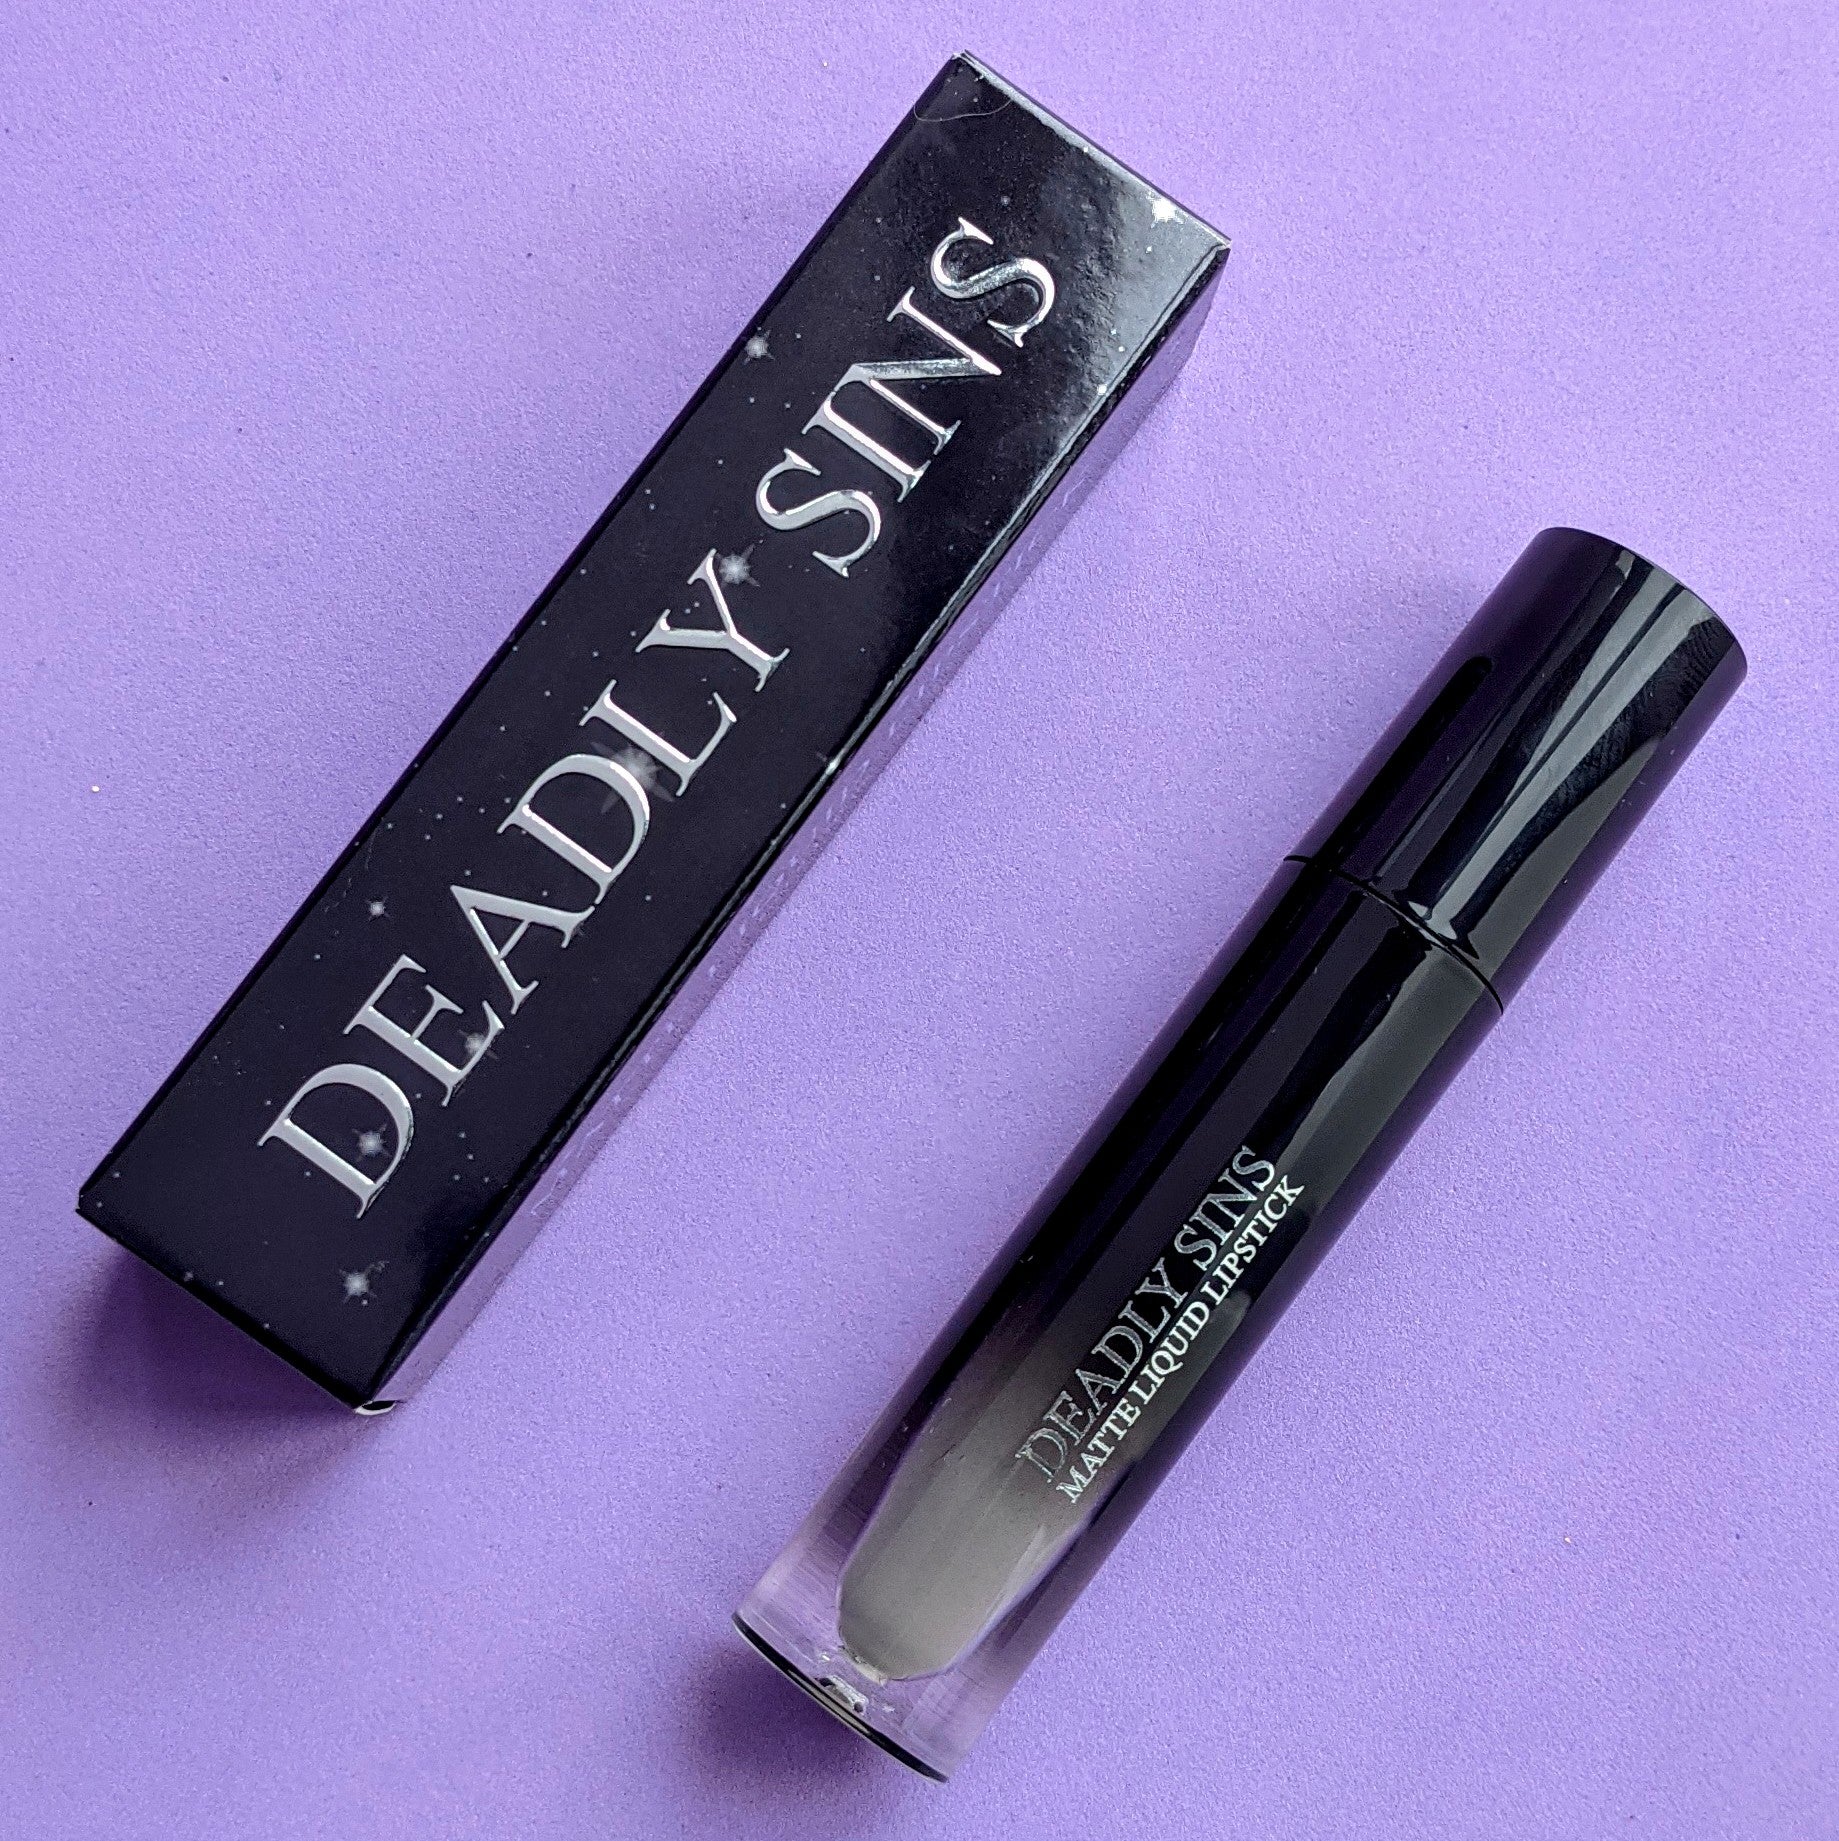 RIP grey matte liquid lipstick Deadly Sins Cosmetics Goth makeup tube and package with stars